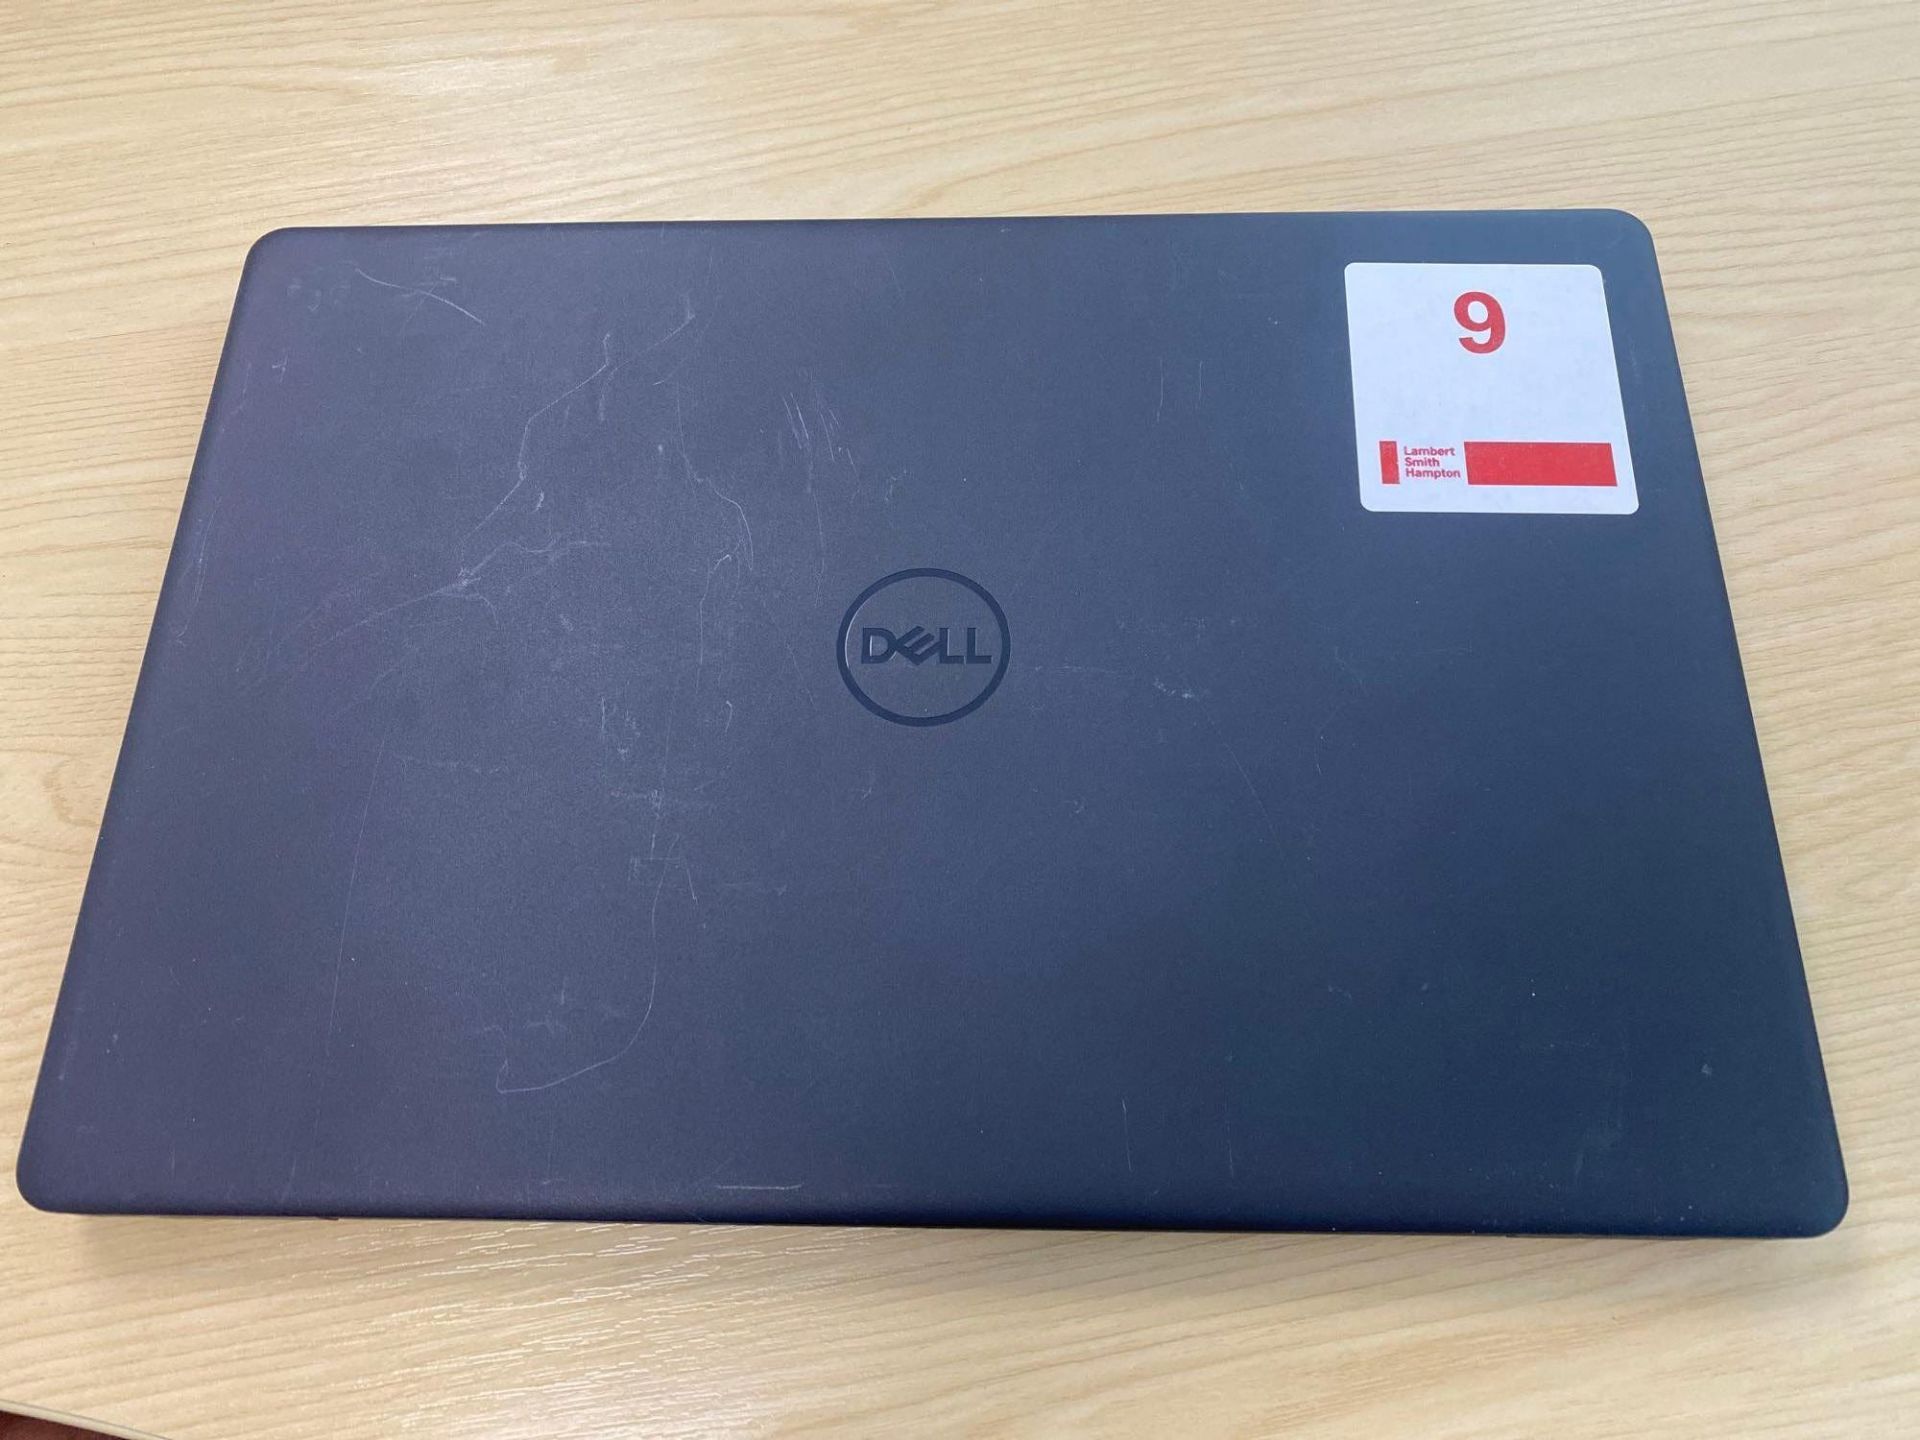 Dell Inspiron 15 3000, 15” laptop with i7processor complete with charger